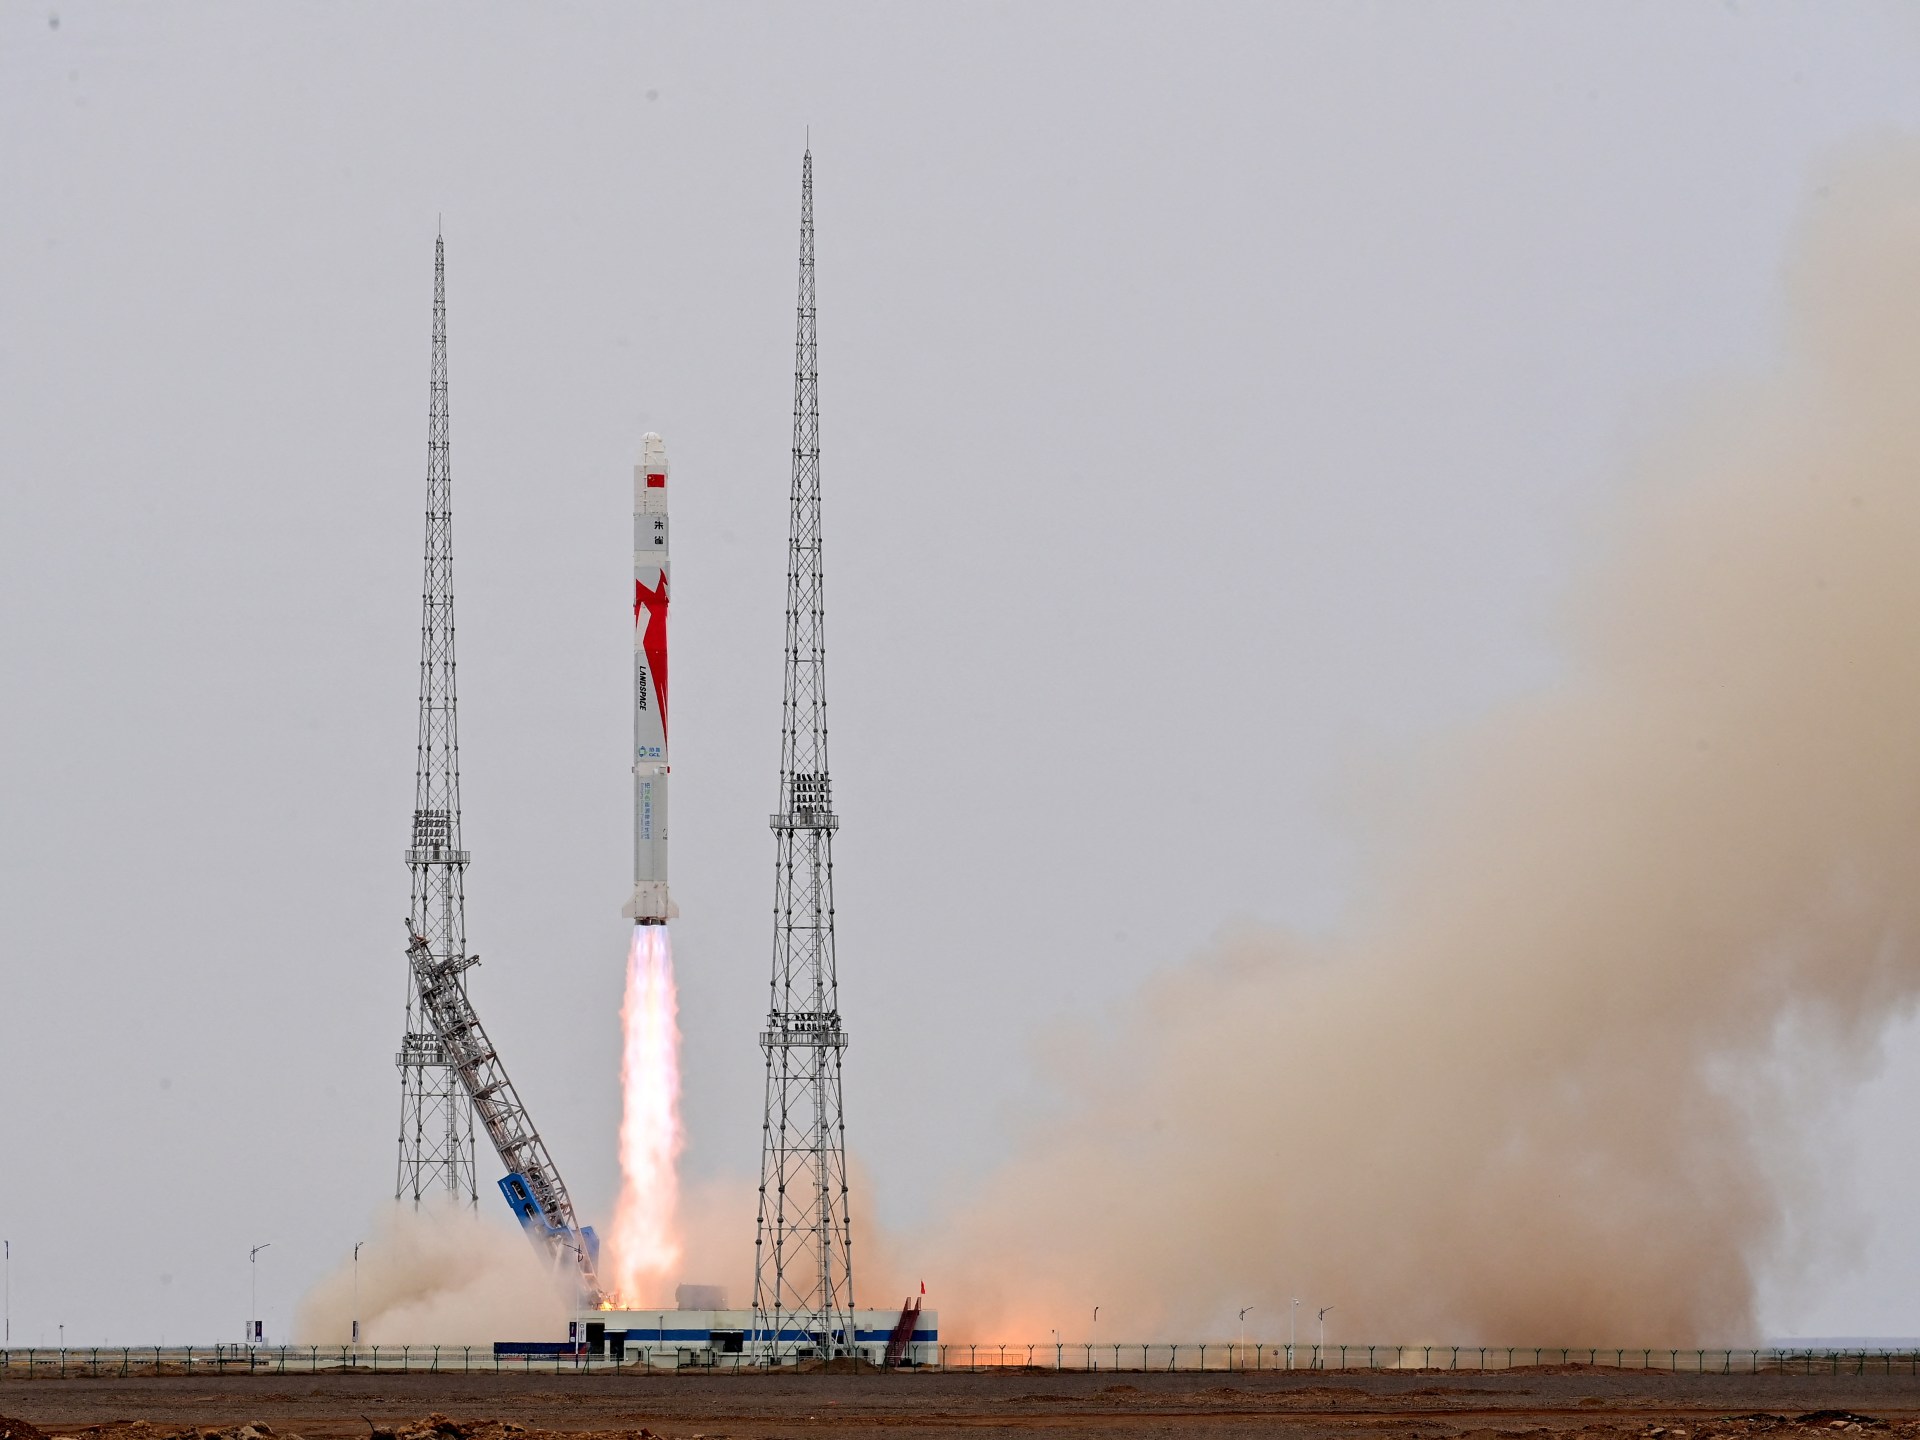 Chinese methane-powered rocket launches satellites into orbit | Space News #Chinese #methanepowered #rocket #launches #satellites #orbit #Space #News